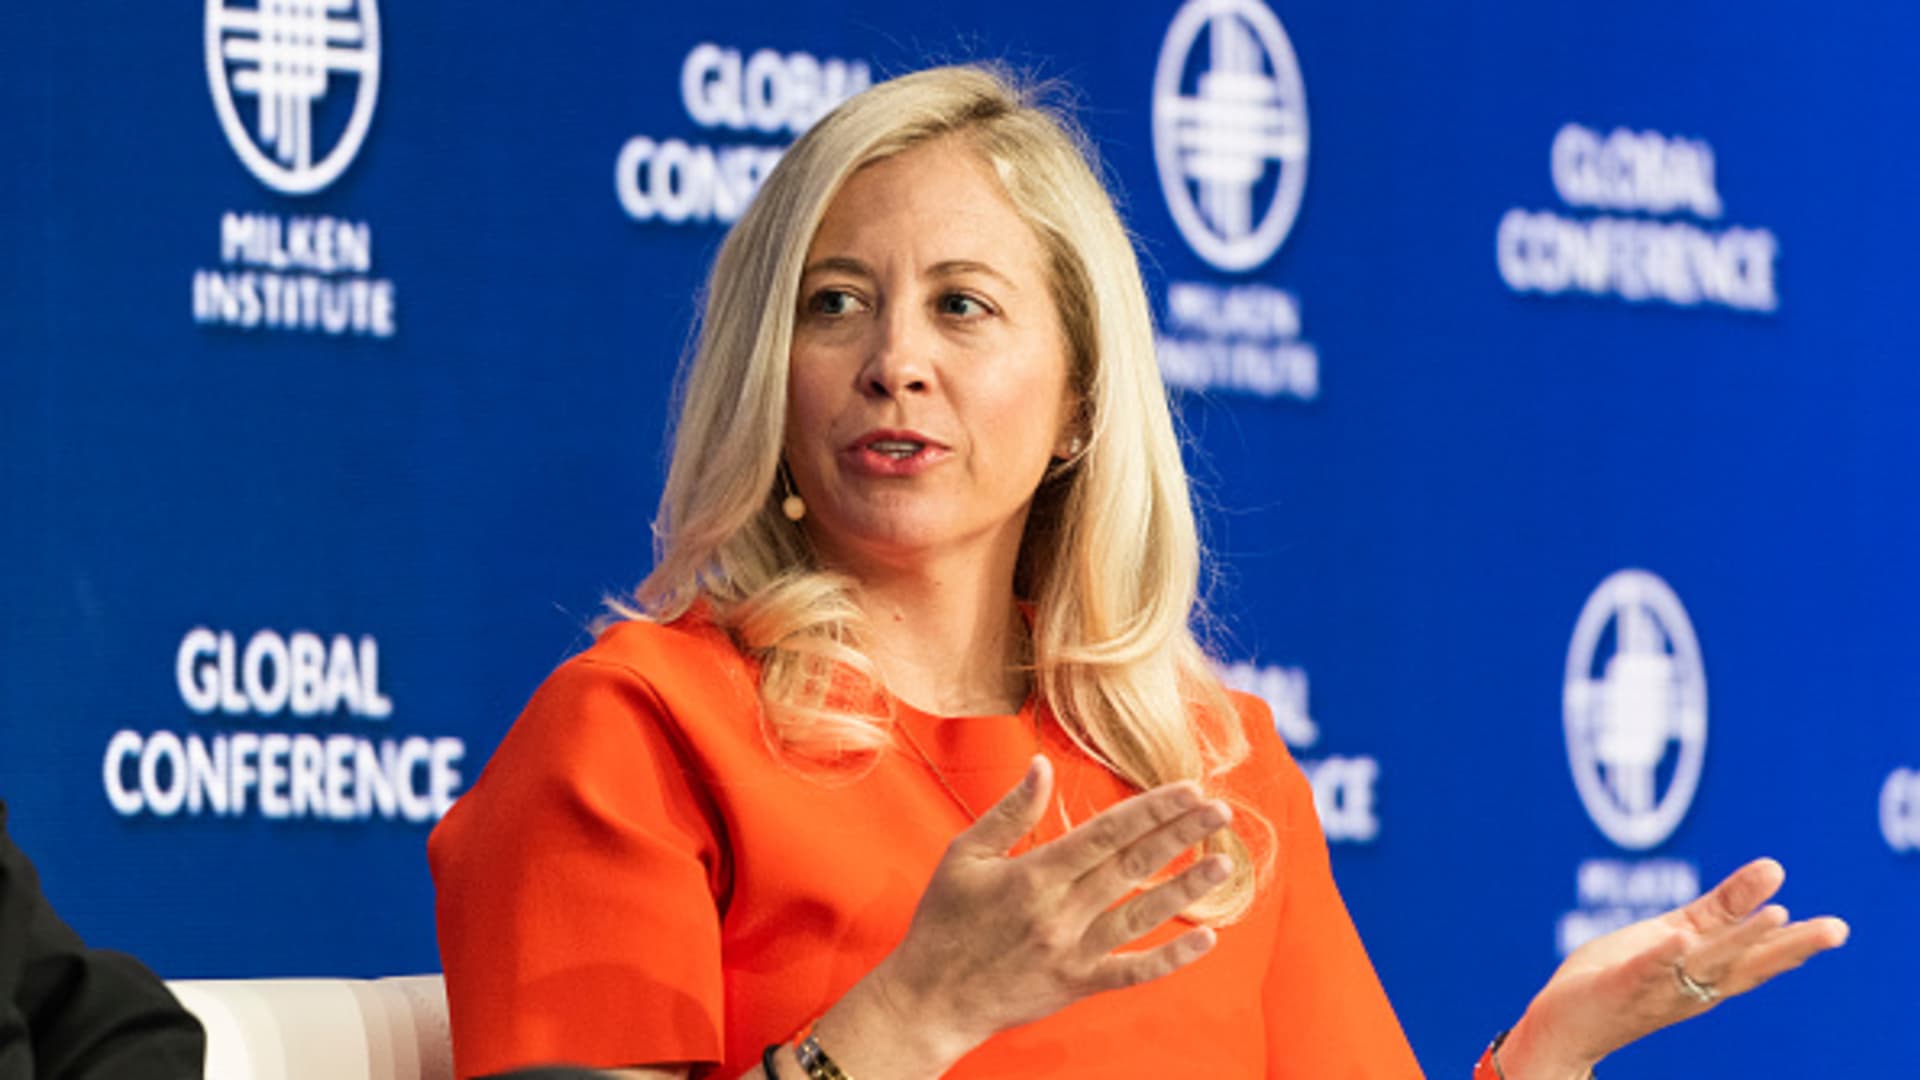 Elizabeth Spaulding, chief executive officer of Stitch Fix, participates in a panel discussion during the Milken Institute Global Conference in Beverly Hills, California, U.S., on Monday, May 2, 2022.